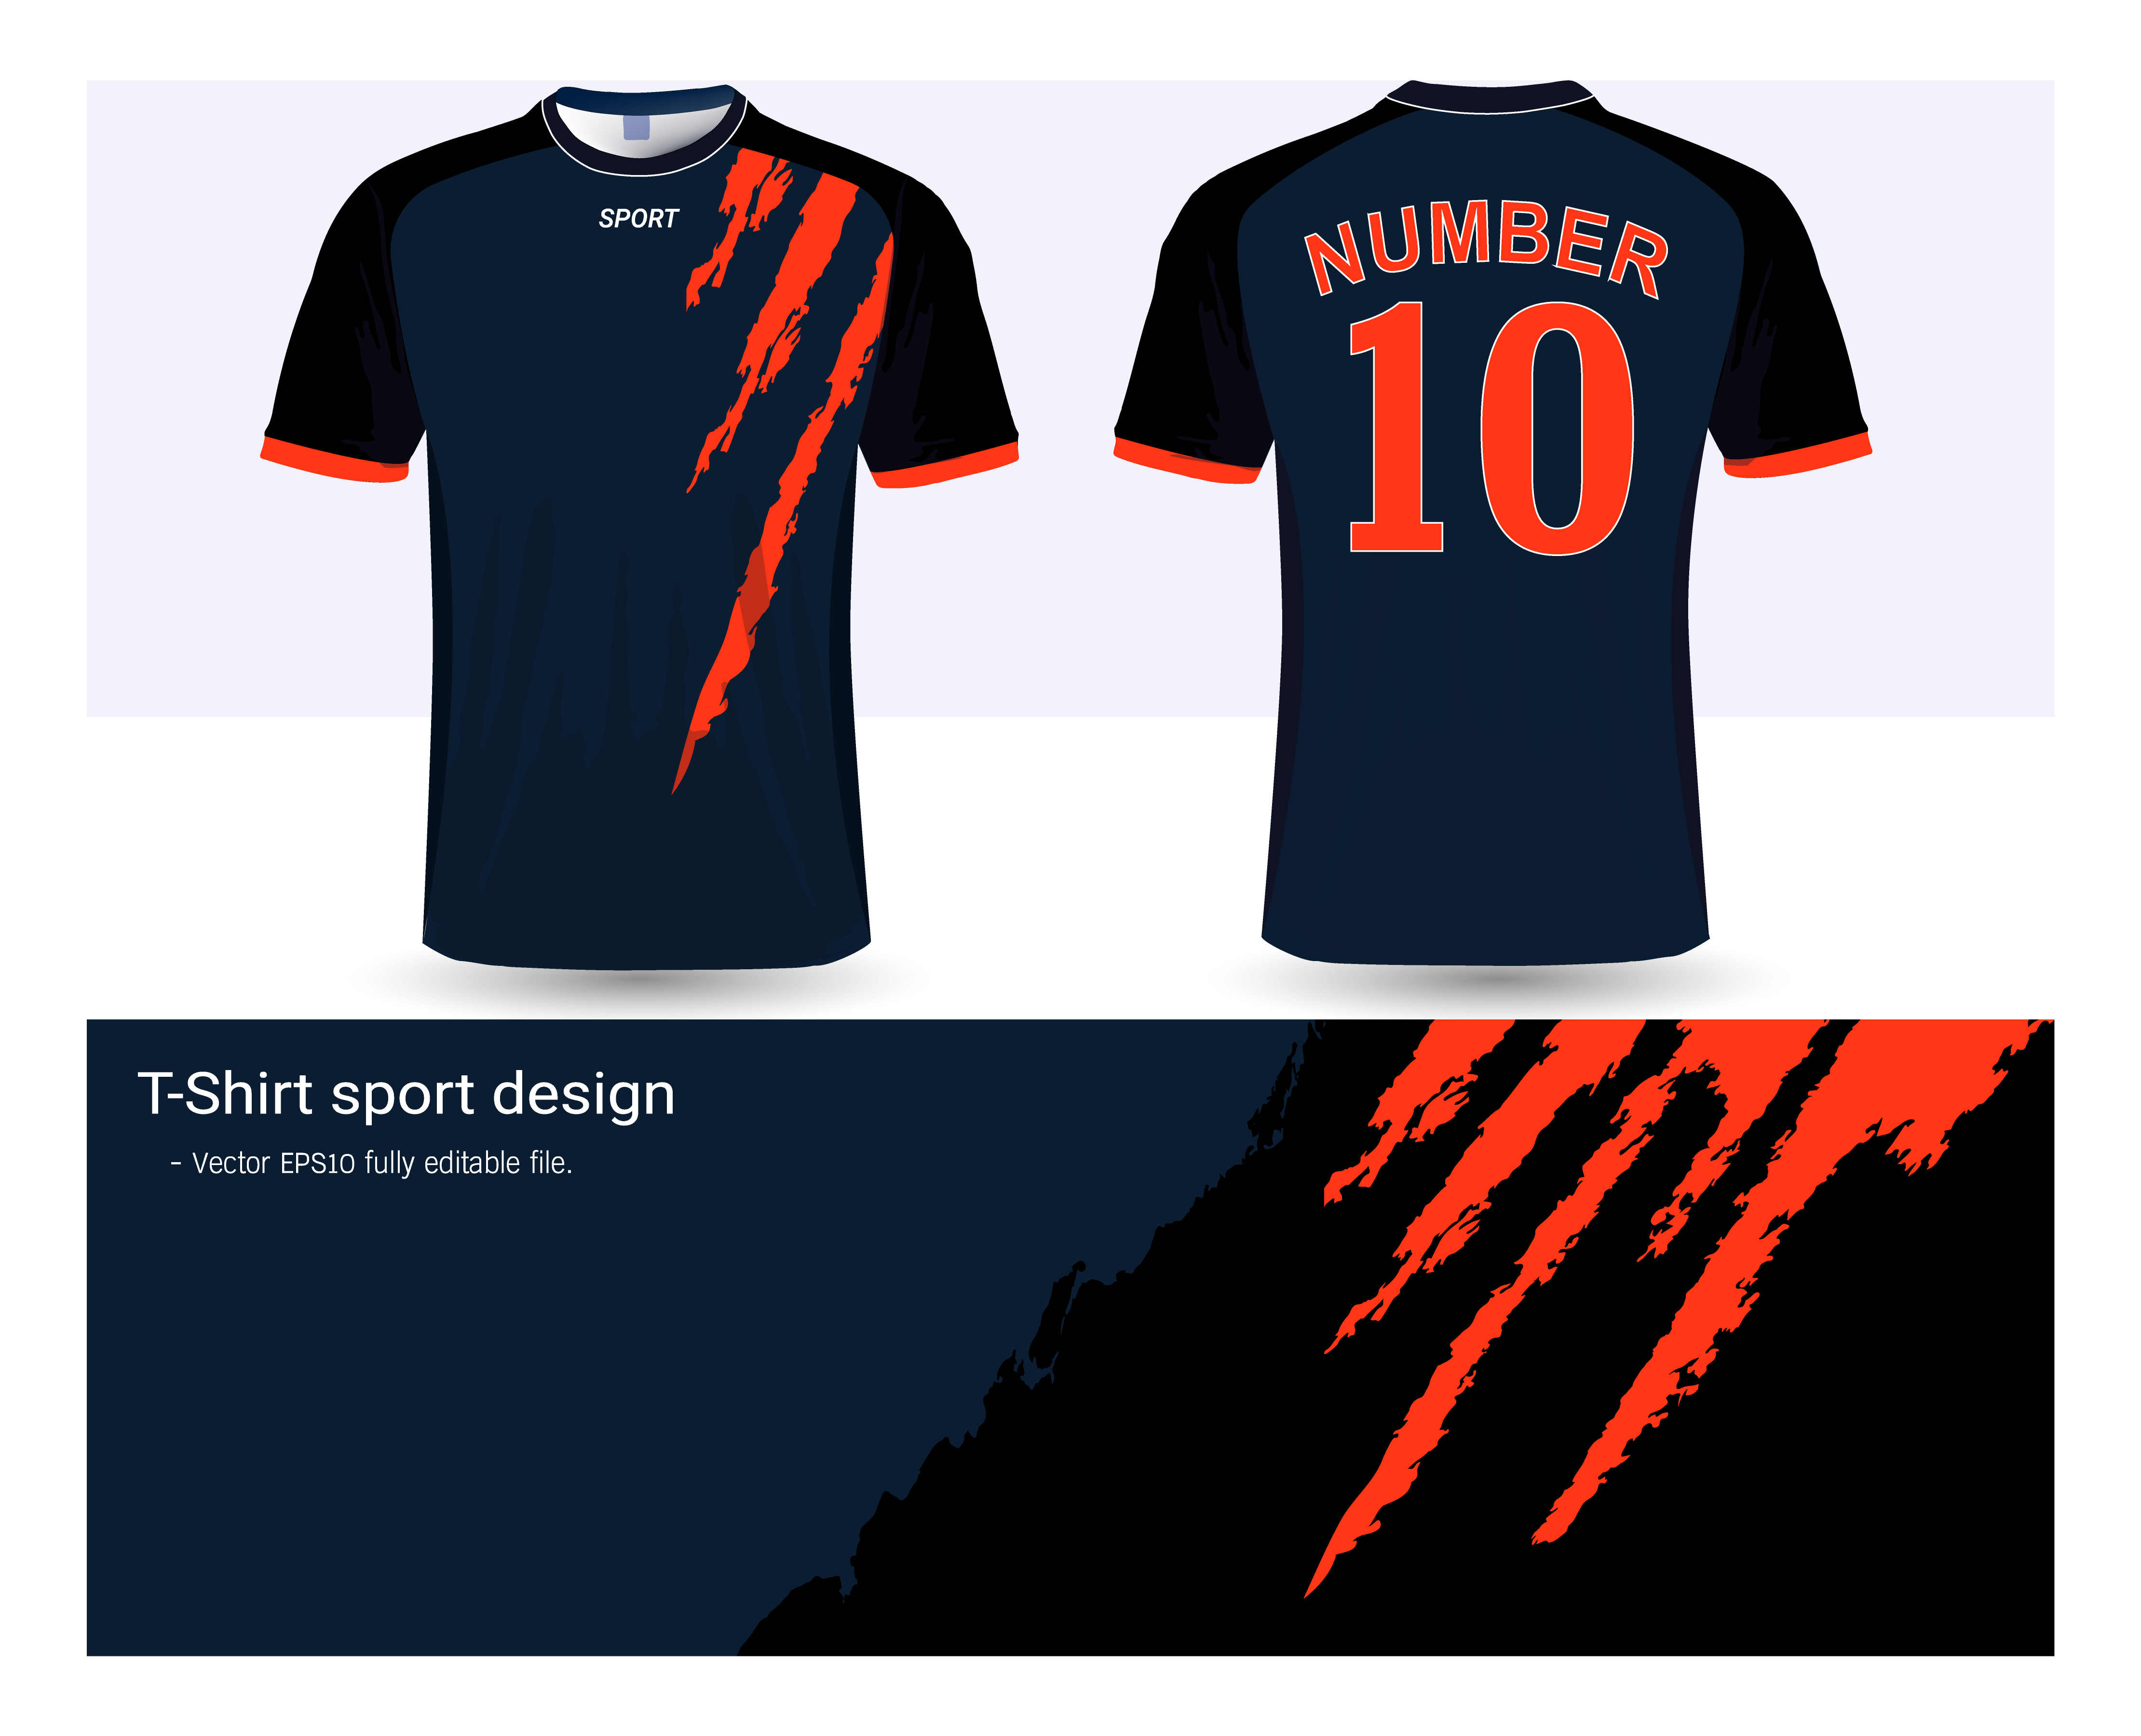 Soccer jersey and tshirt sport mockup template, Graphic design for